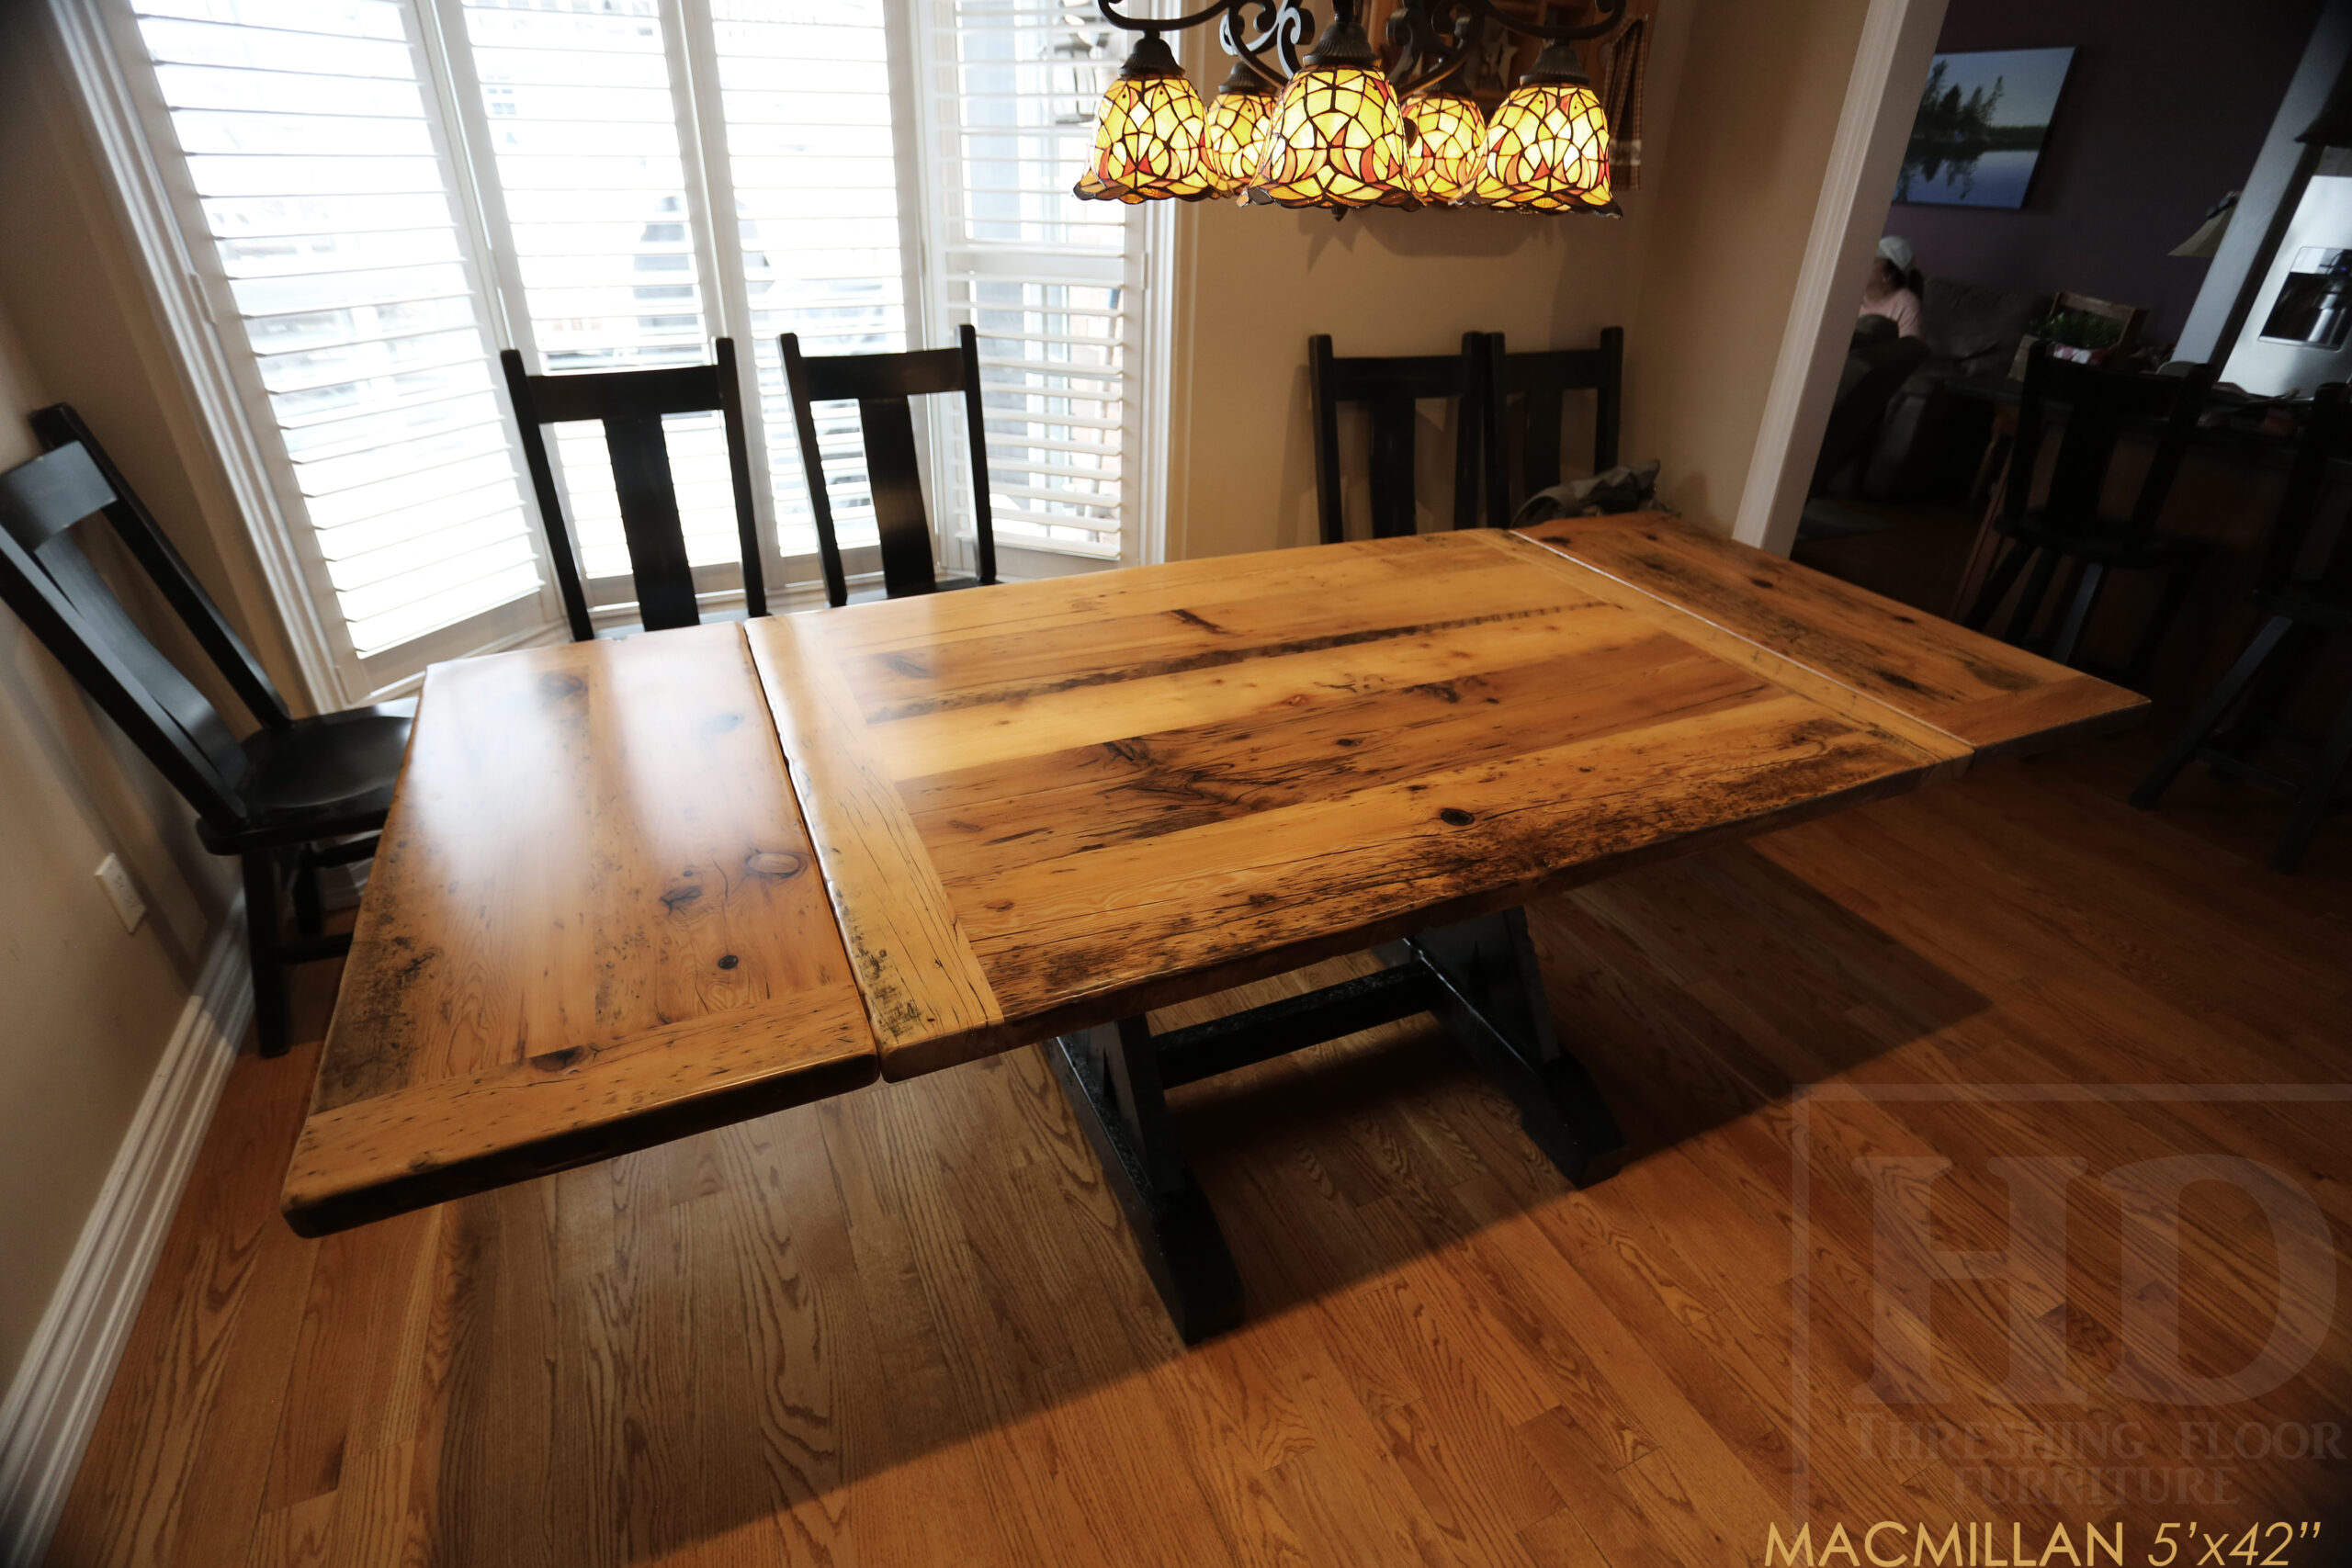 Project Summary: 5â€™ Reclaimed Barnwood Table we made for a Caledonia, Ontario home â€“ 42â€ wide - Sawbuck Base [Painted Black] - Old Growth Hemlock Threshing Floor 2â€ Construction - Original edges & distressing maintained â€“ Bread Edge Boards â€“ Greytone Option - Premium epoxy + satin polyurethane finish â€“ Two 12â€ Leaves â€“ Wormy Maple Plank Back Chairs / Painted Black with Sandthroughs - www.table.ca